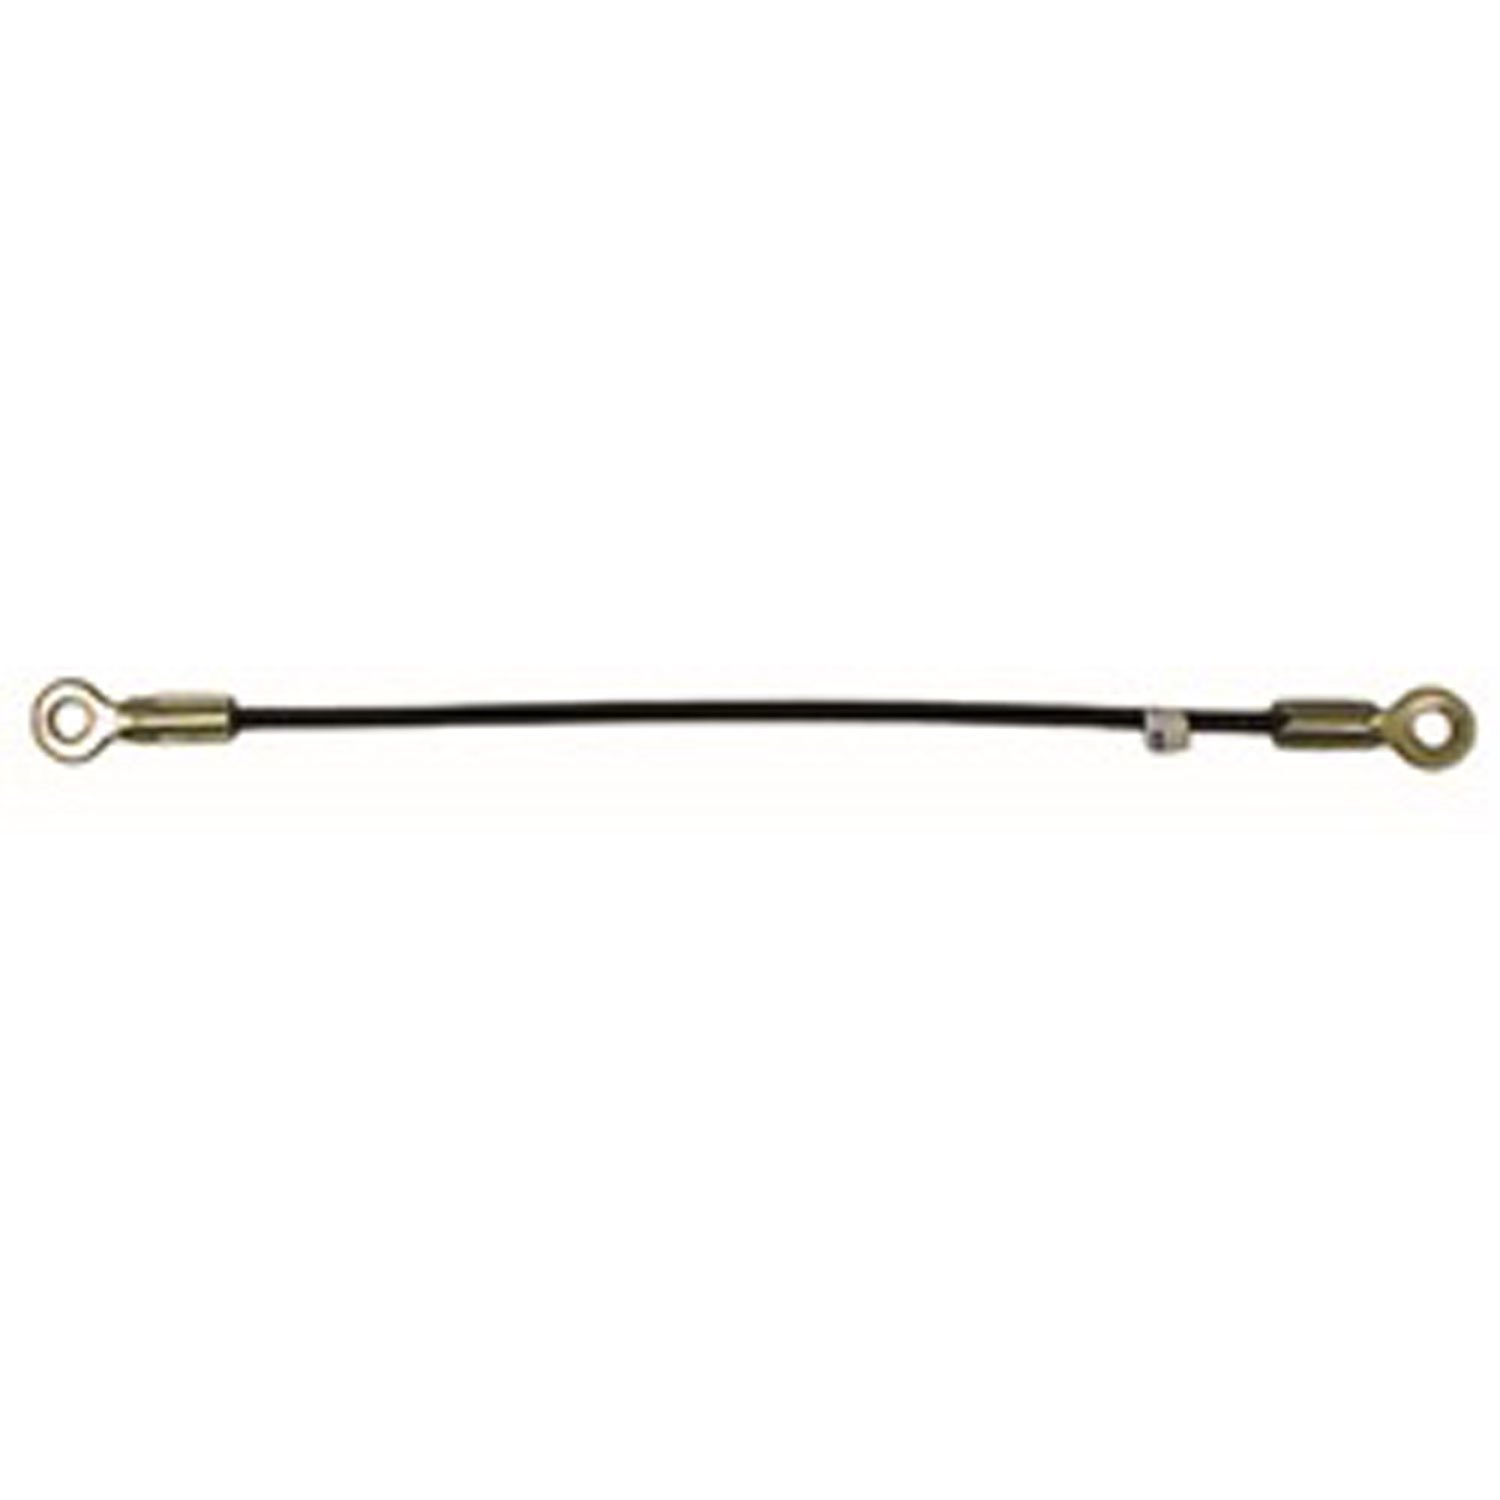 Replacement tailgate cable from Omix-ADA, Fits 76-86 Jeep